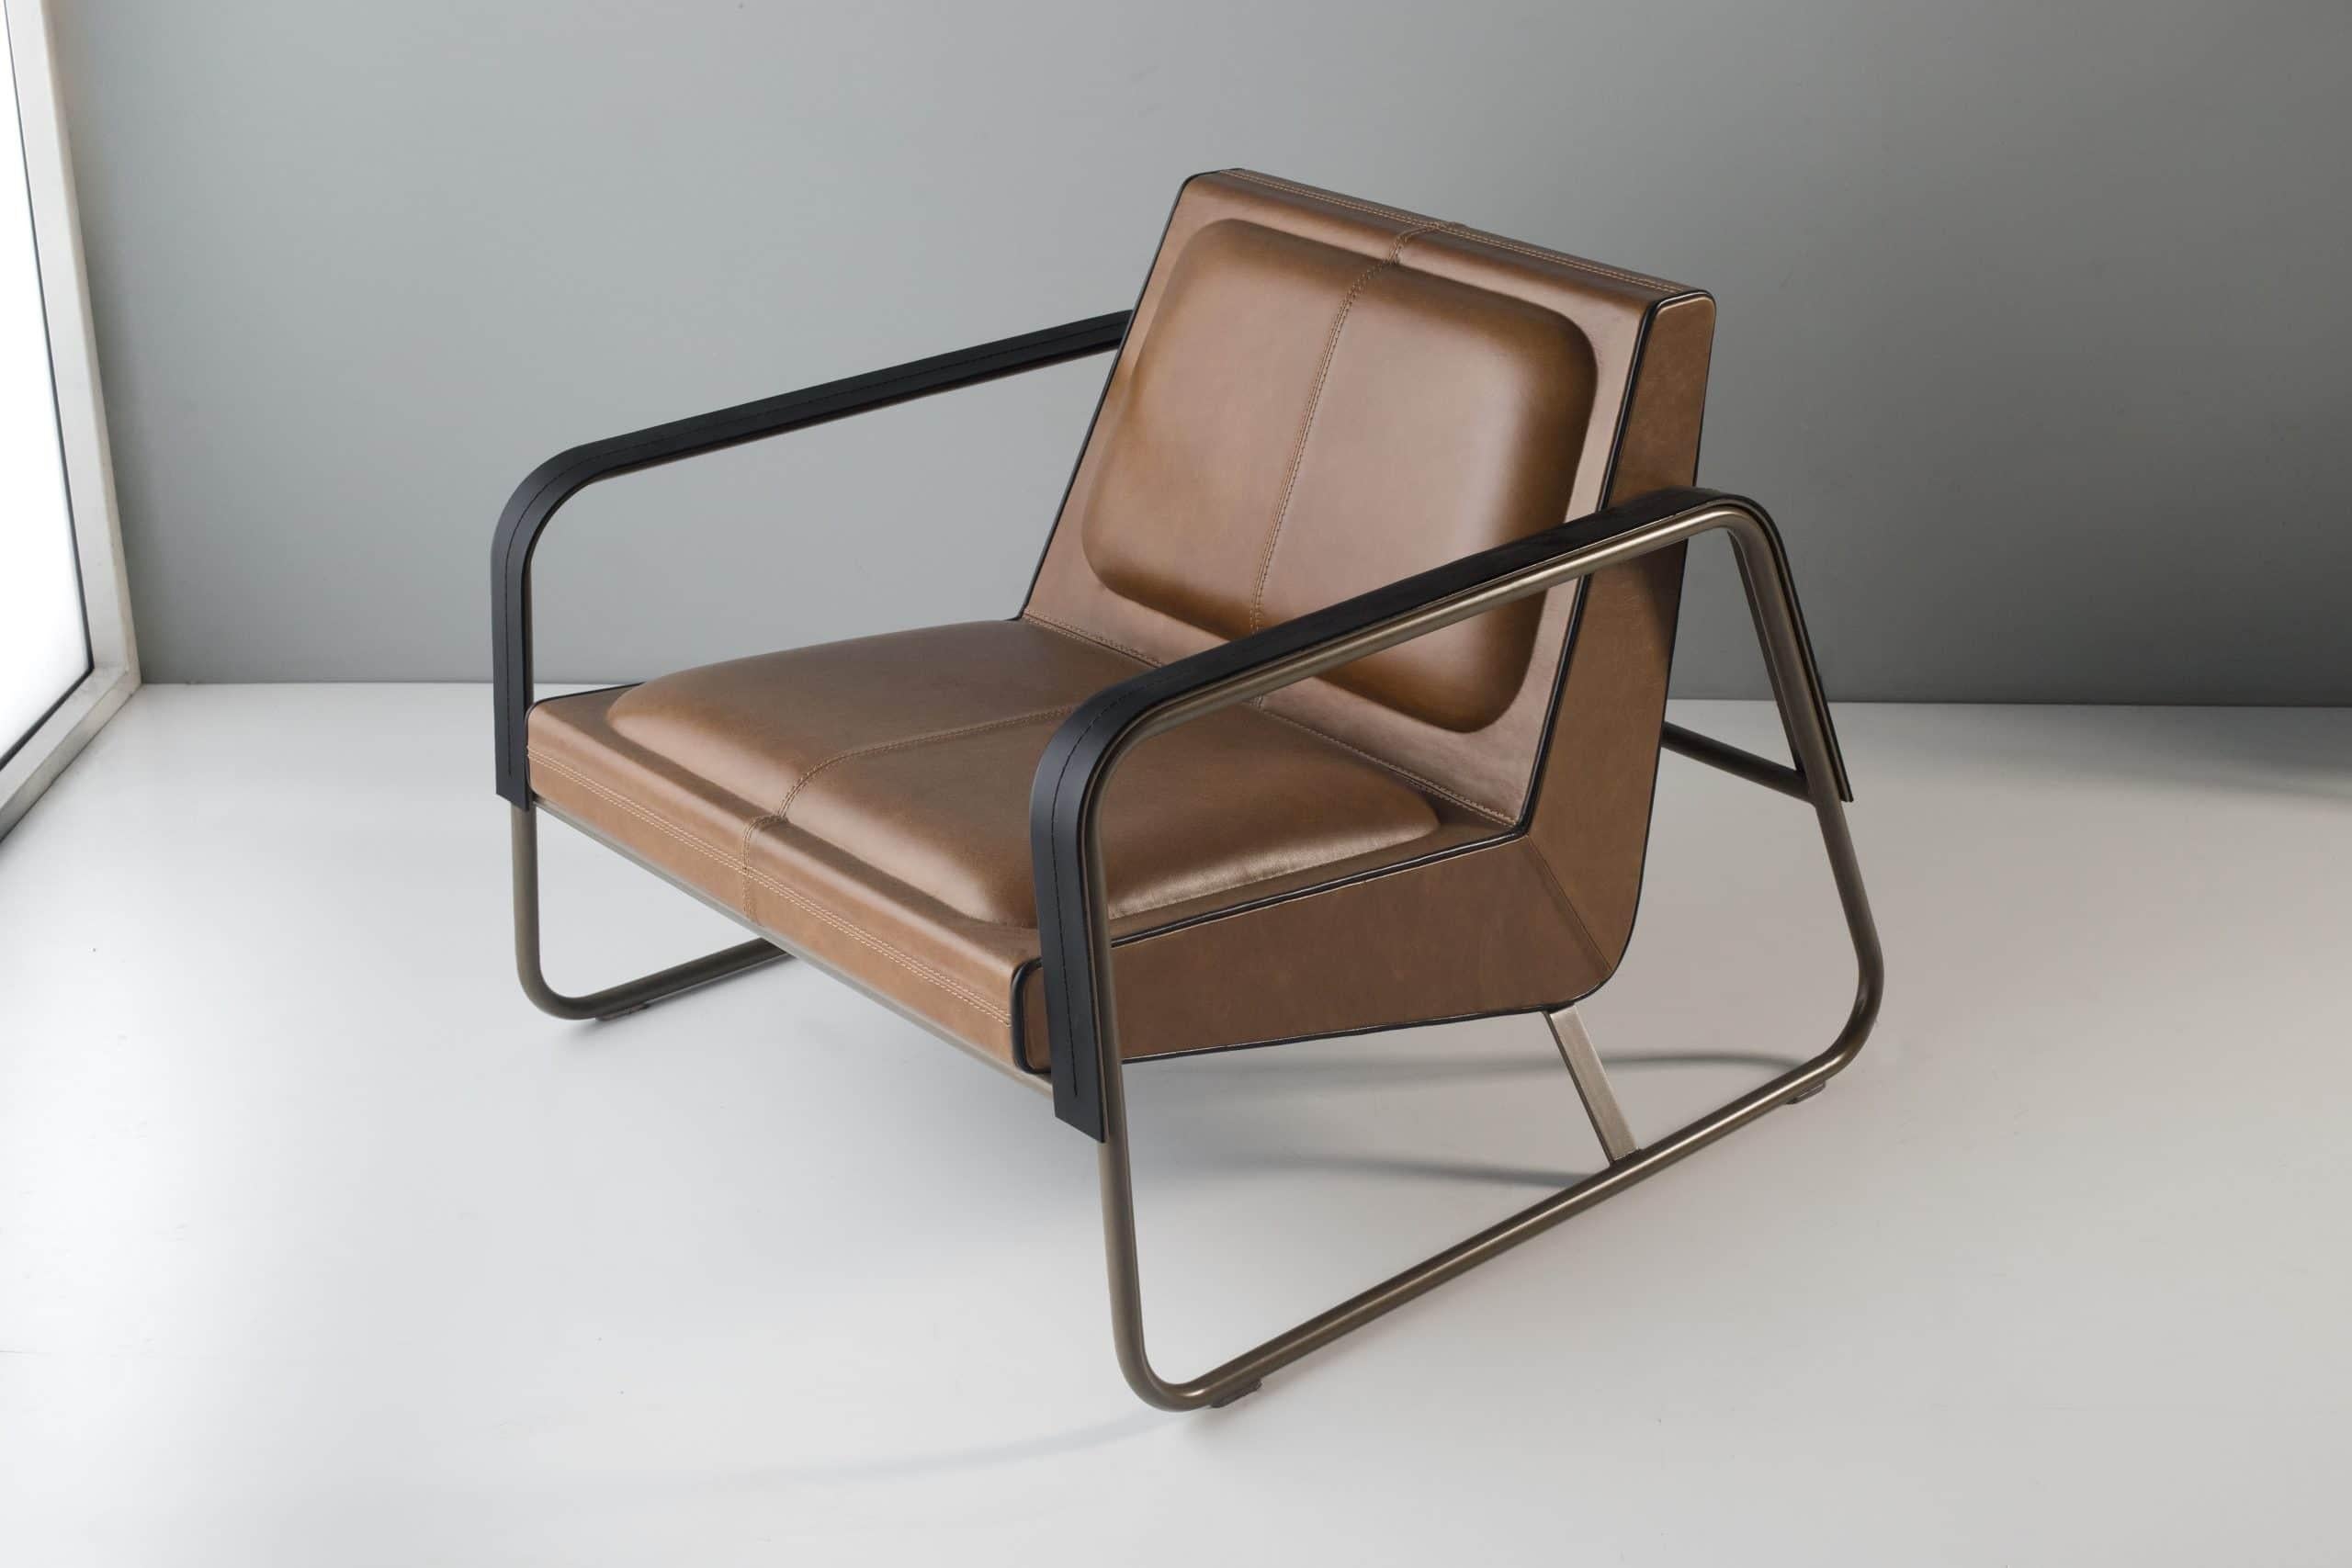 Elle Lounge Chair by Doimo Brasil
Dimensions: W 88 x D 82 x H 70 cm 
Materials: Metal, Soleta, Paint, Leather.


With the intention of providing good taste and personality, Doimo deciphers trends and follows the evolution of man and his space. To